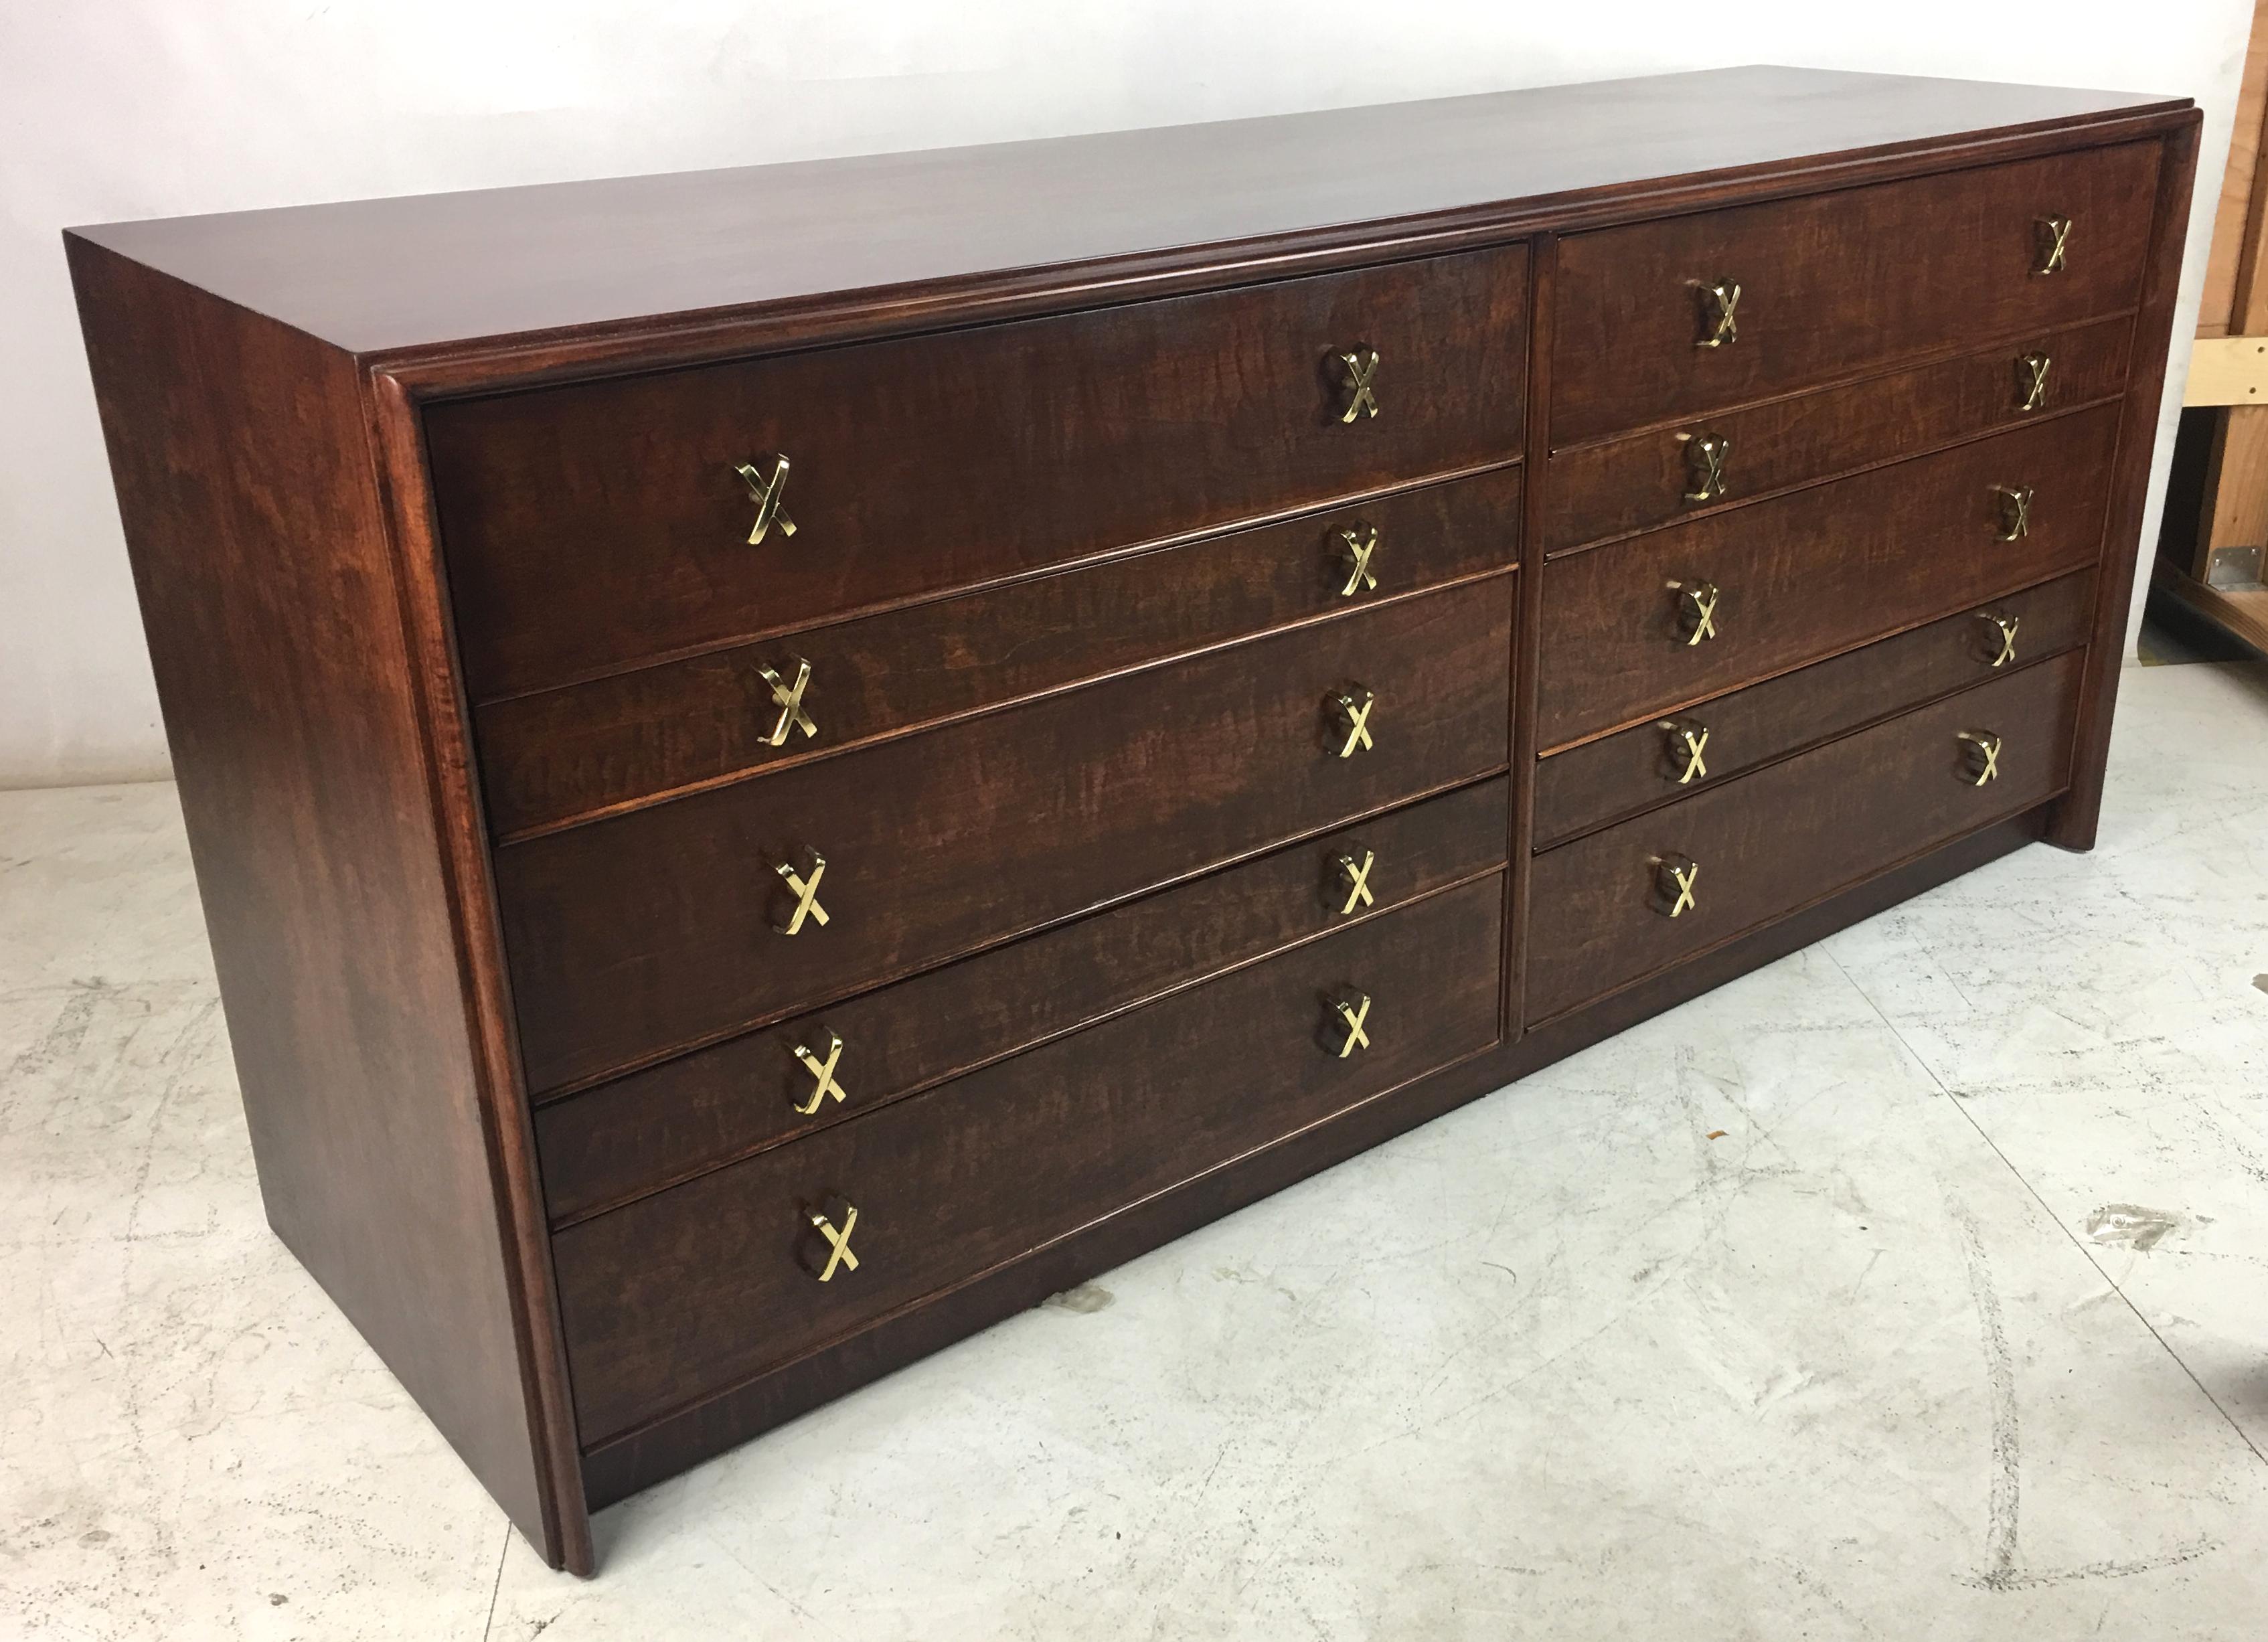 Spectacularly grained curly maple dresser by Paul Frankl for Johnson (sold through John Stuart, Inc.-NY). The piece has been painstakingly restored and refinished and the hardware has been professionally polished and lacquered. The cabinet is made